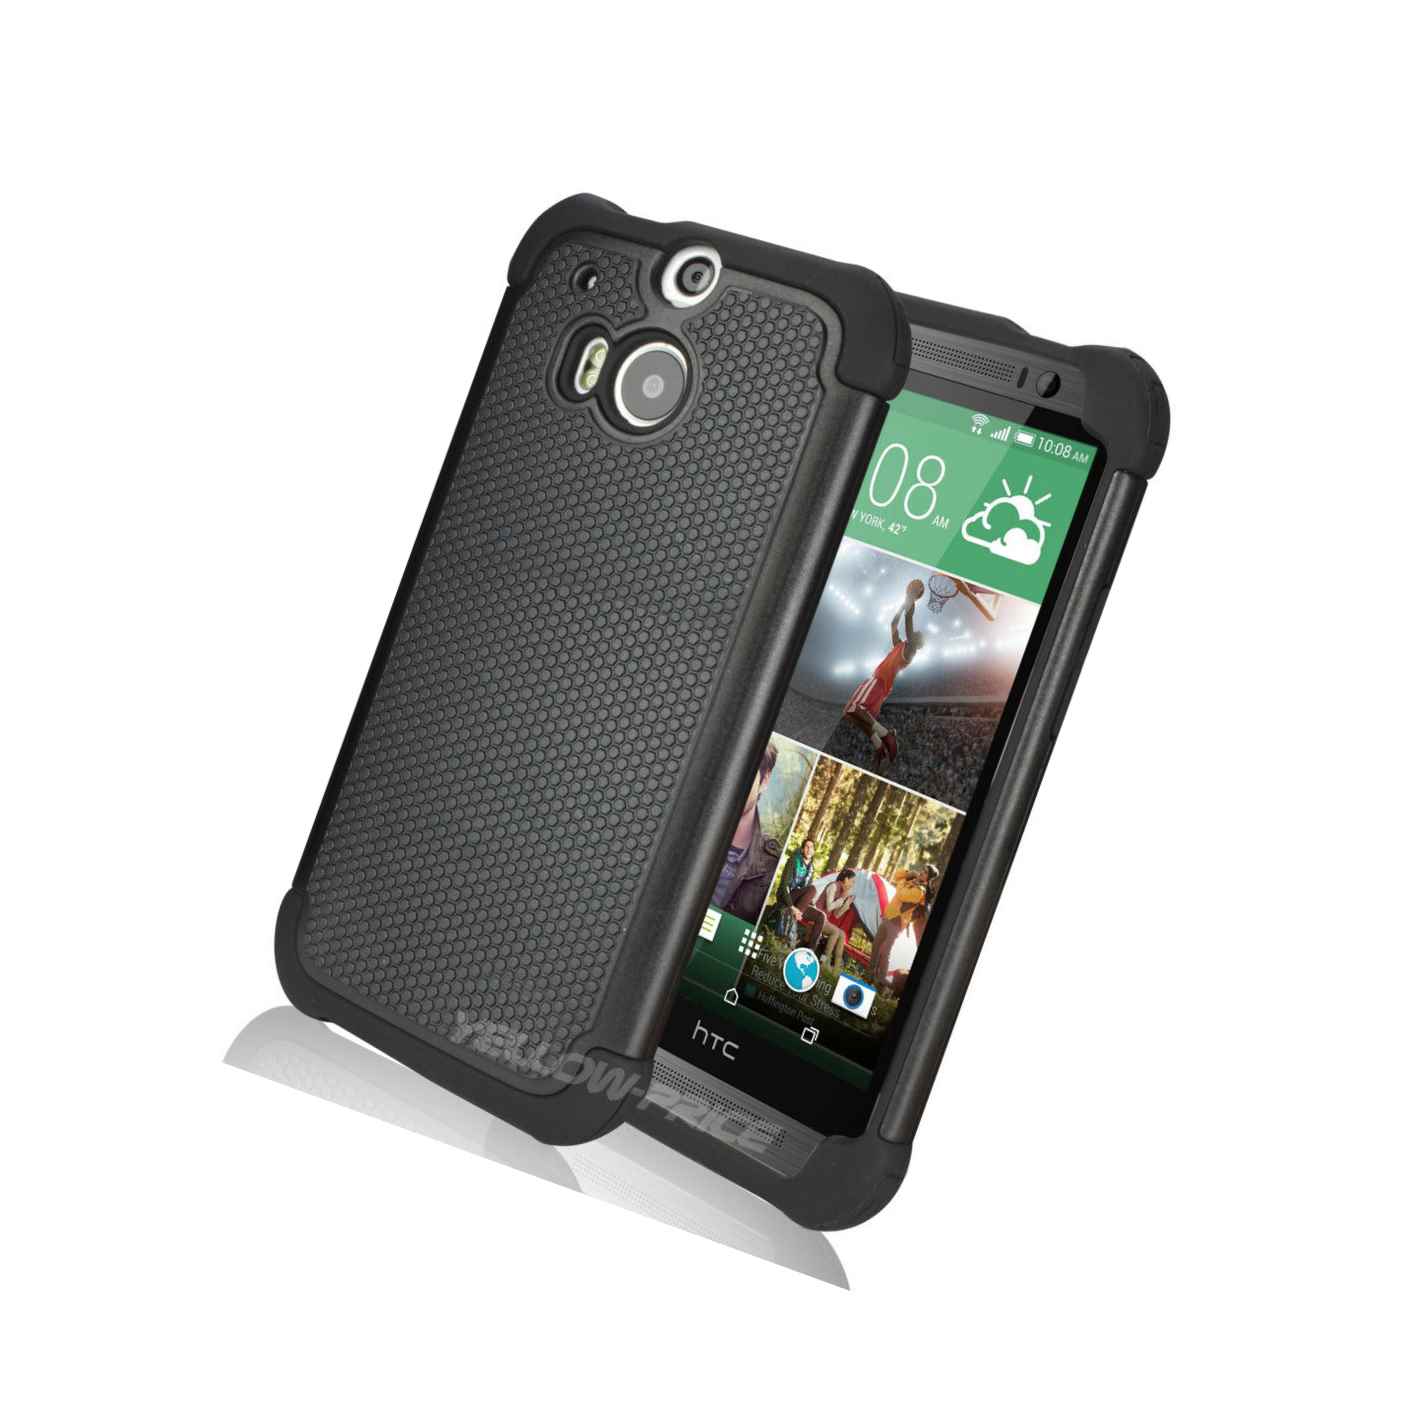 Korting zondaar Interactie Case for HTC ONE M8 Shockproof Dual Layer Armor Case Cover for Men –  Globaleparts